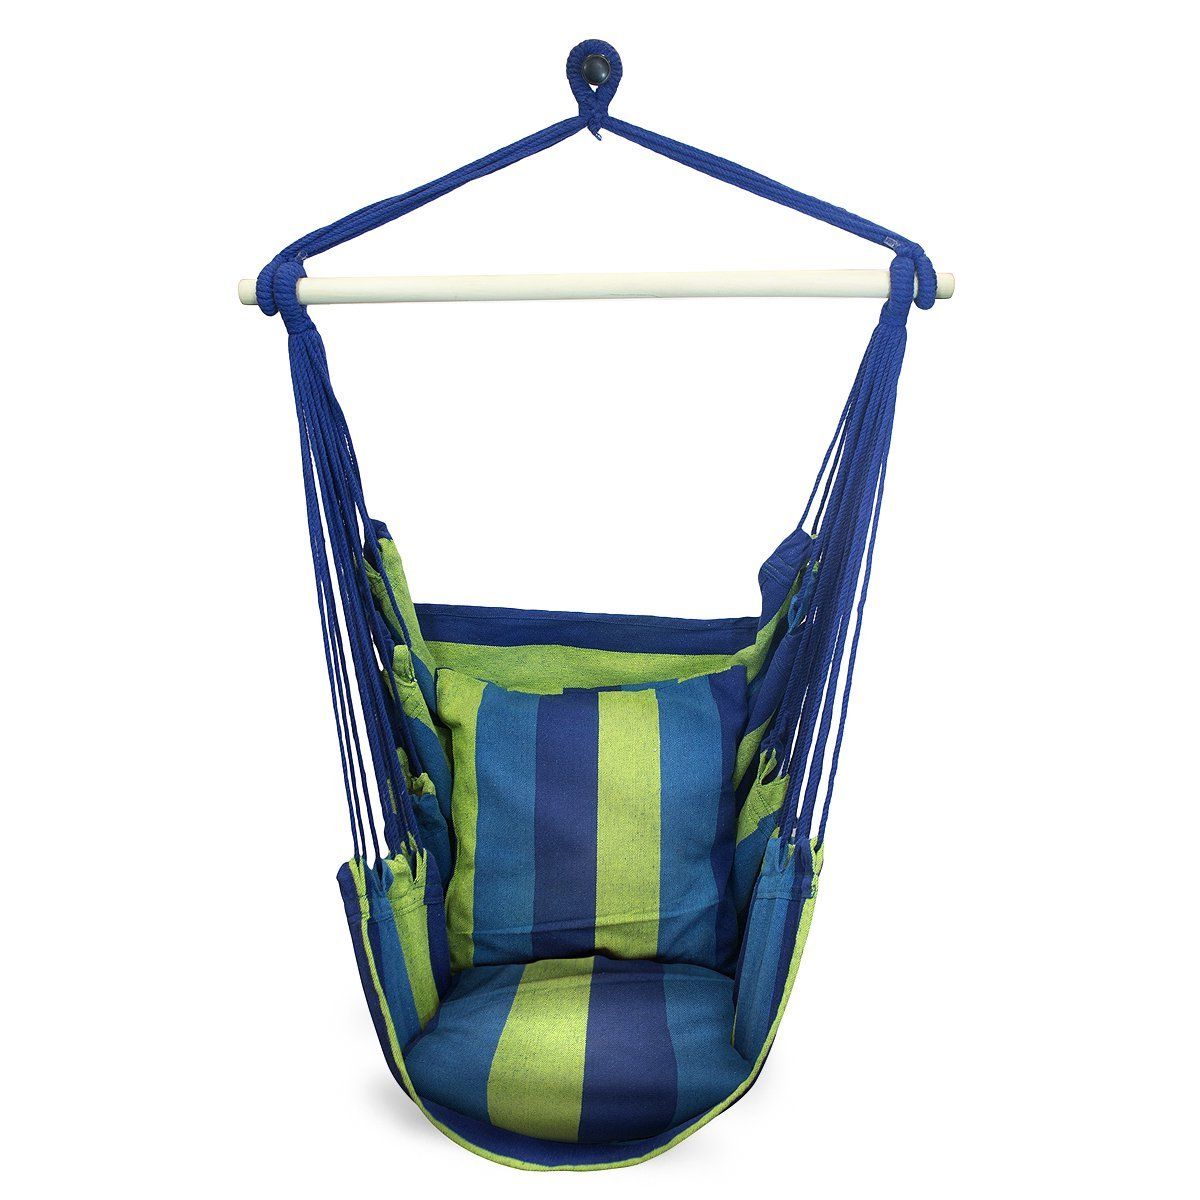 Top 10 Best Hammock Chairs And Swings In 2019 Reviews – Thetbpr Inside Fashionable Cotton Porch Swings (View 21 of 30)